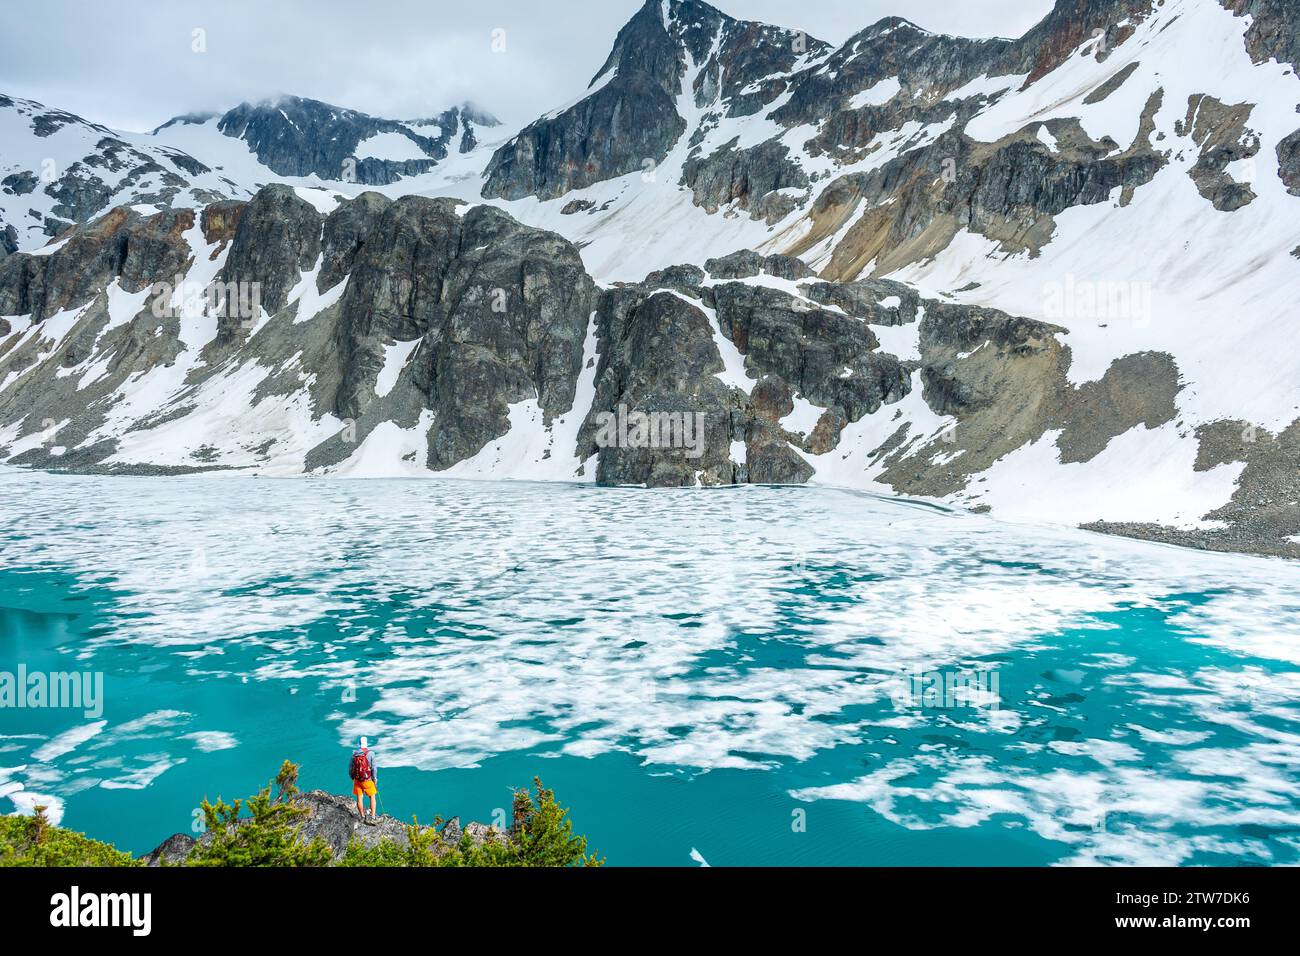 Lone hiker gazes across the icy expanse of Wedgemount Lake beneath towering cliffs. Stock Photo